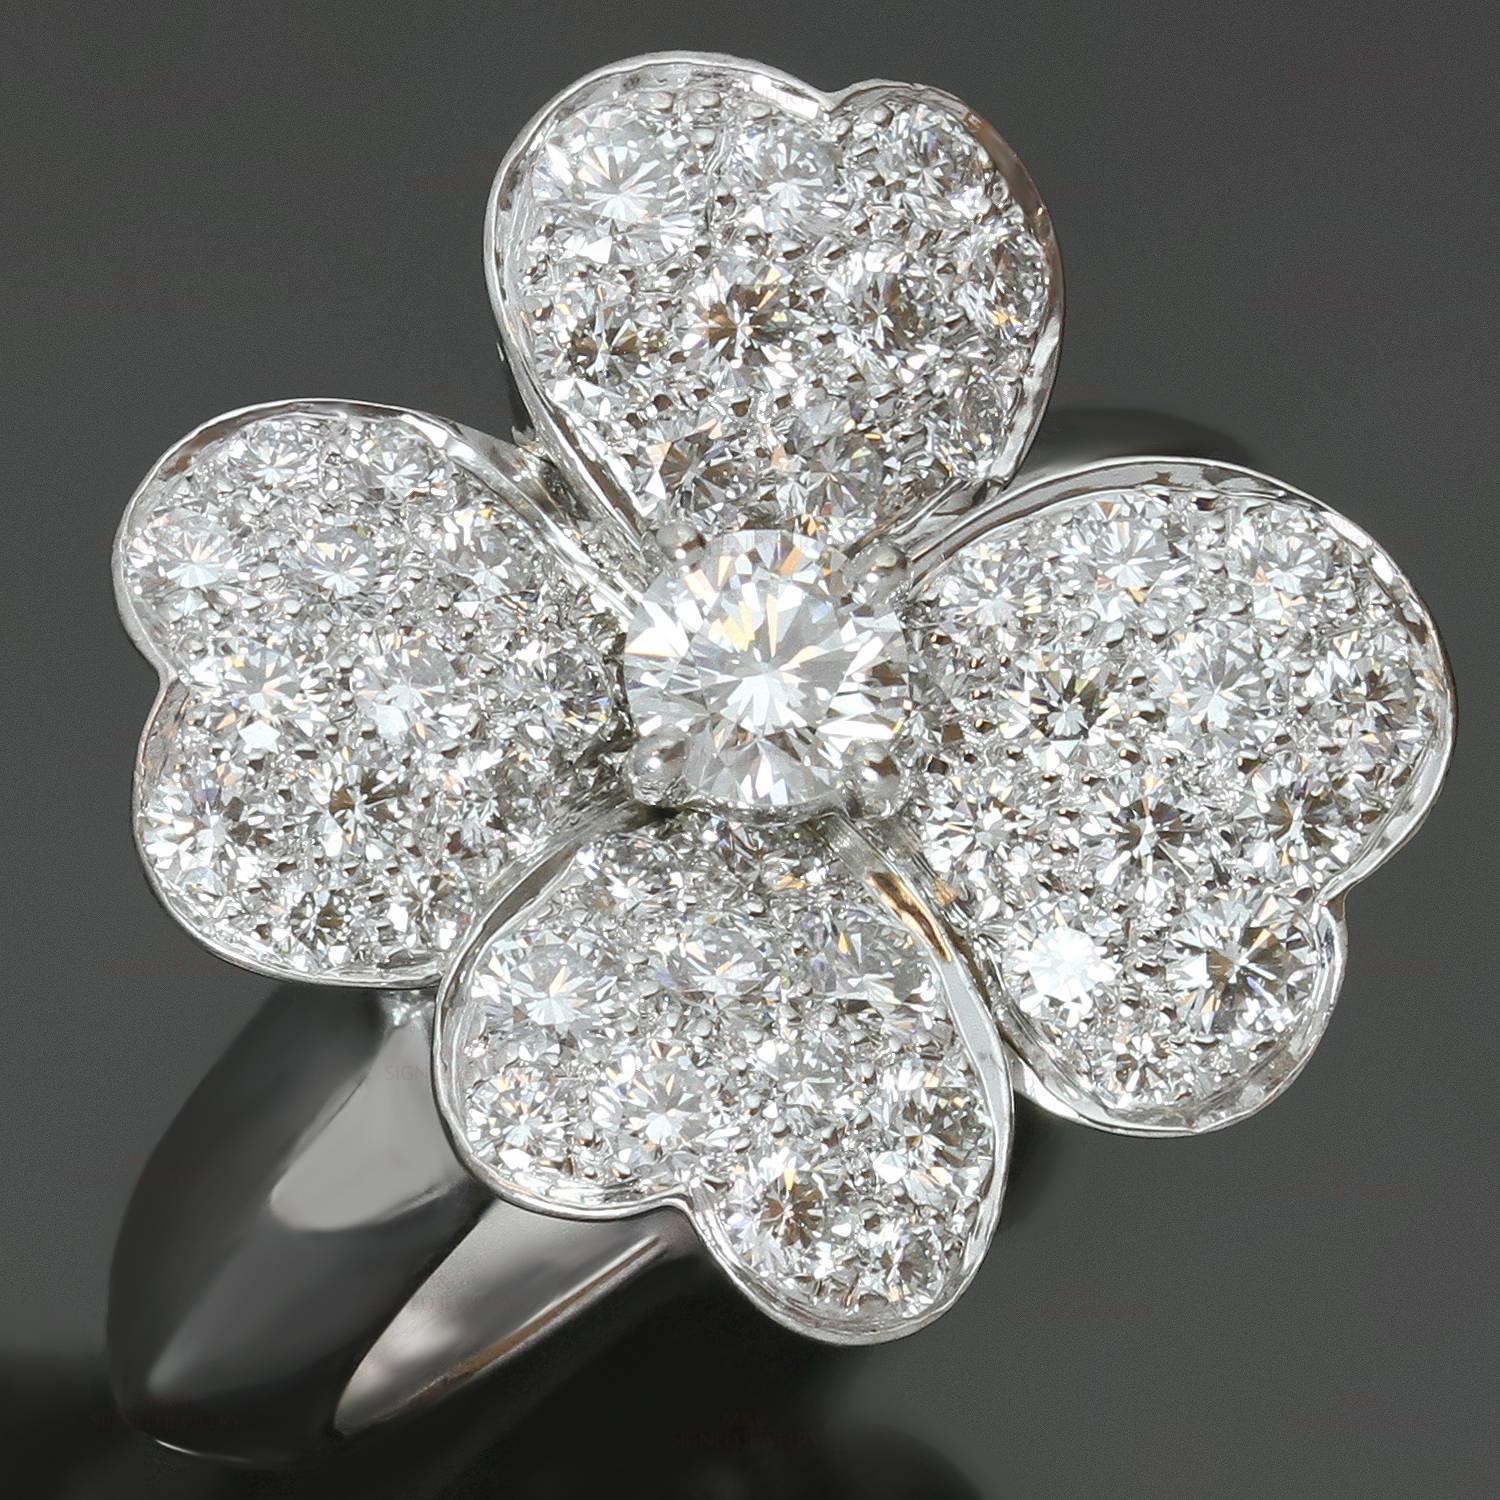 This fabulous hand-made Van Cleef & Arpels ring from the elegant Cosmos collection features a 4-petal flower motif crafted in 18k white gold and set with brilliant-cut round diamonds of an estimated 1.70 carats. This is the medium model of the ring